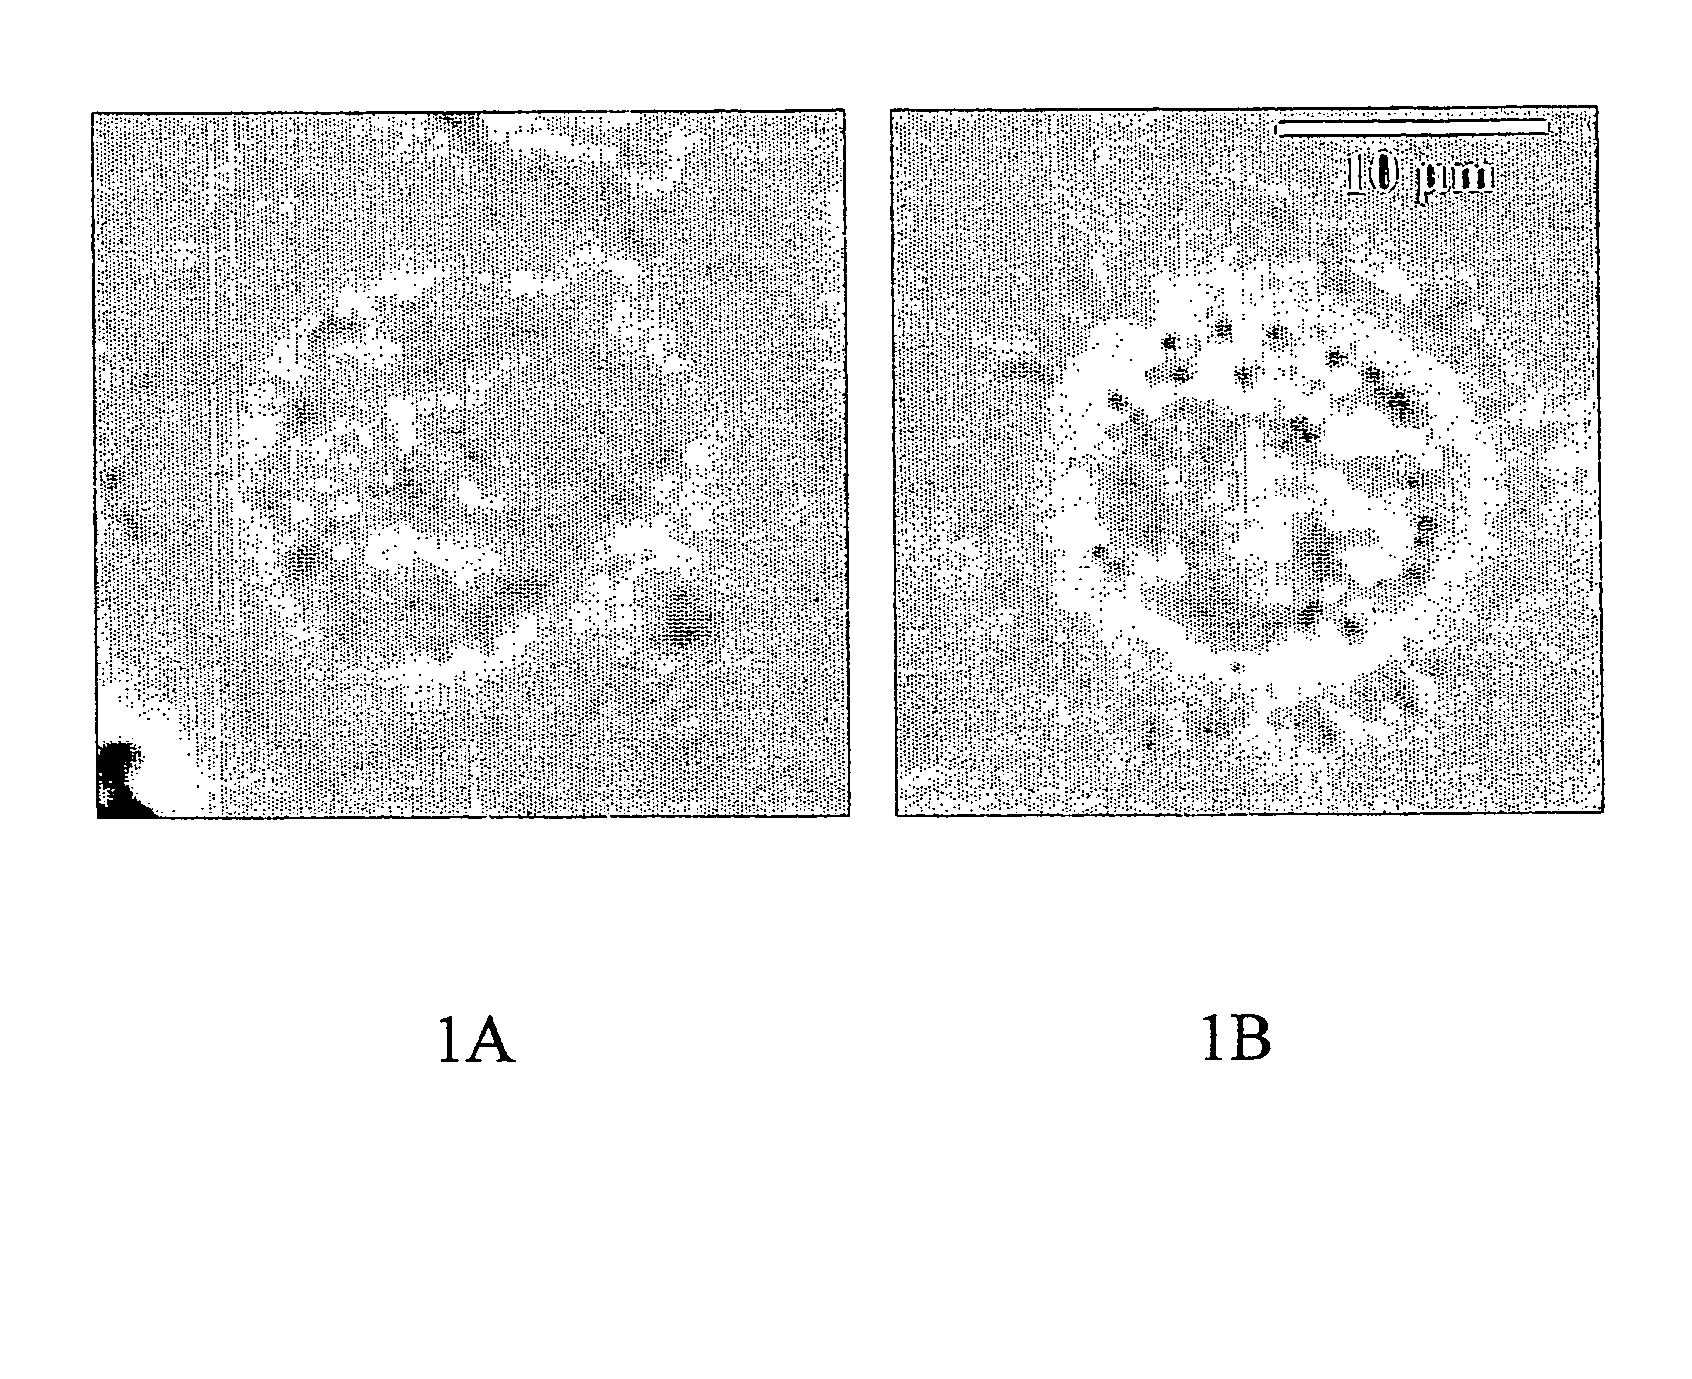 Process for the manufacturing of human mononuclear phagocytic leukocytes